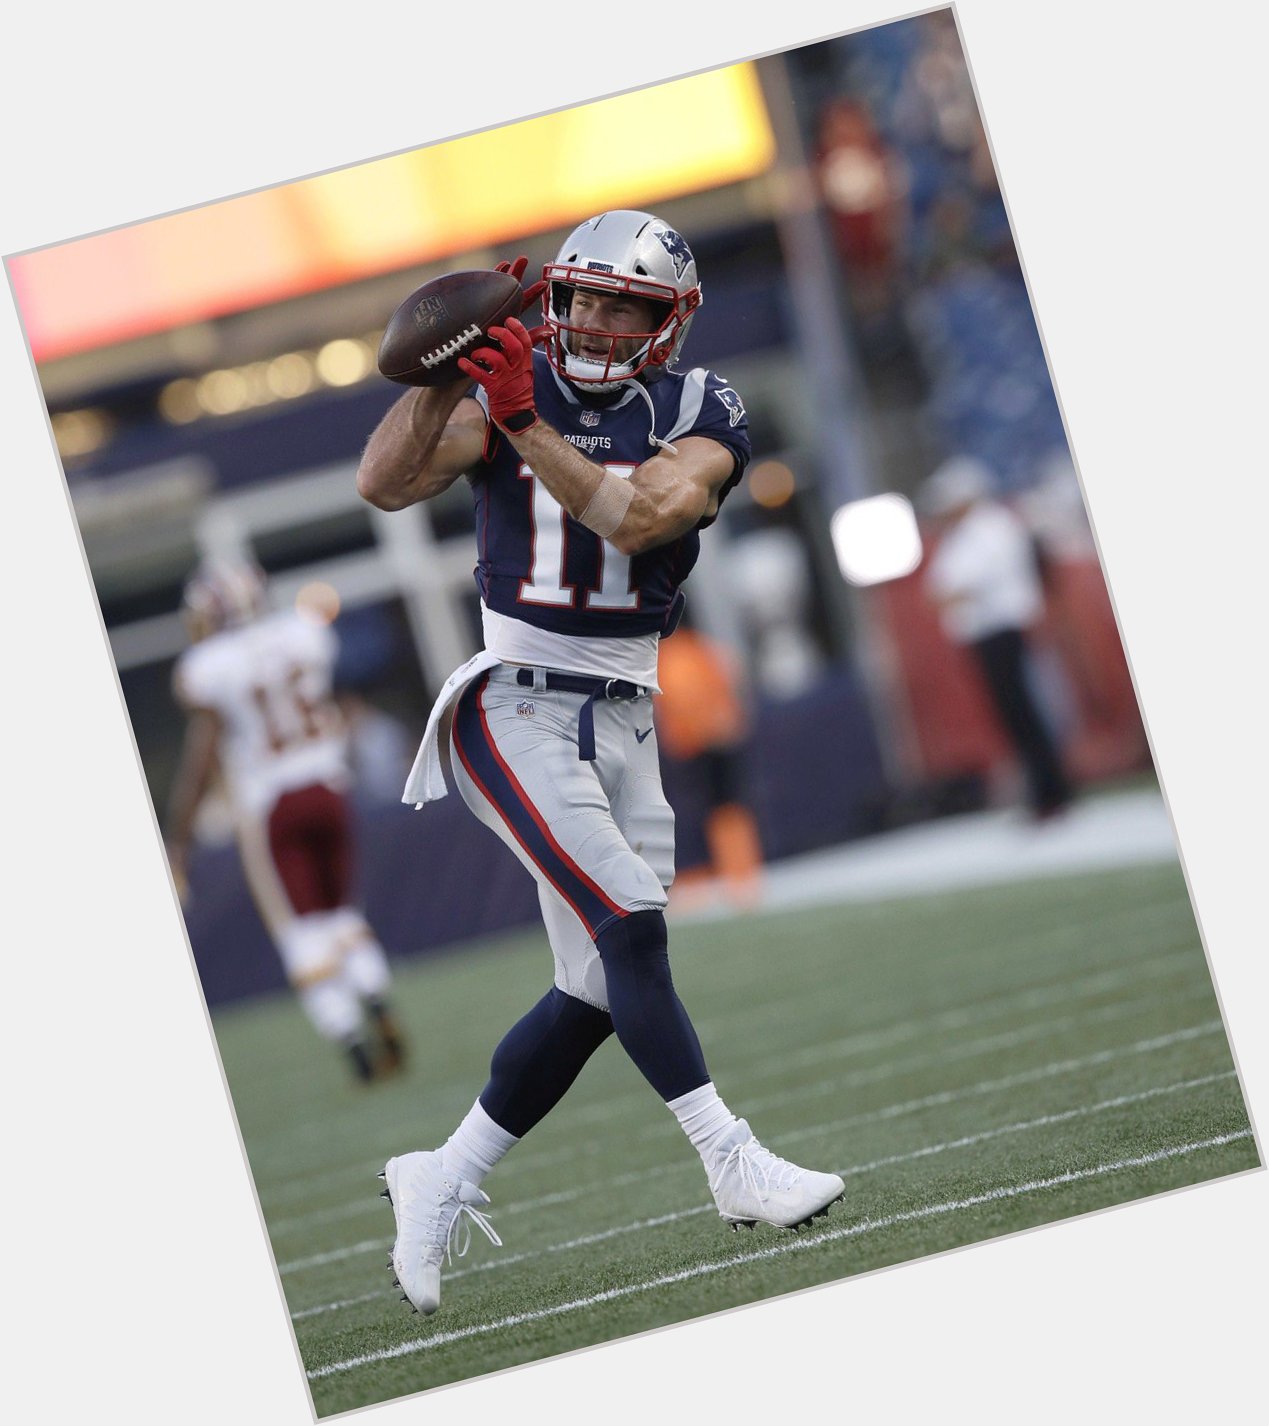 Happy Birthday To our JUCO brother Julian Edelman ( 